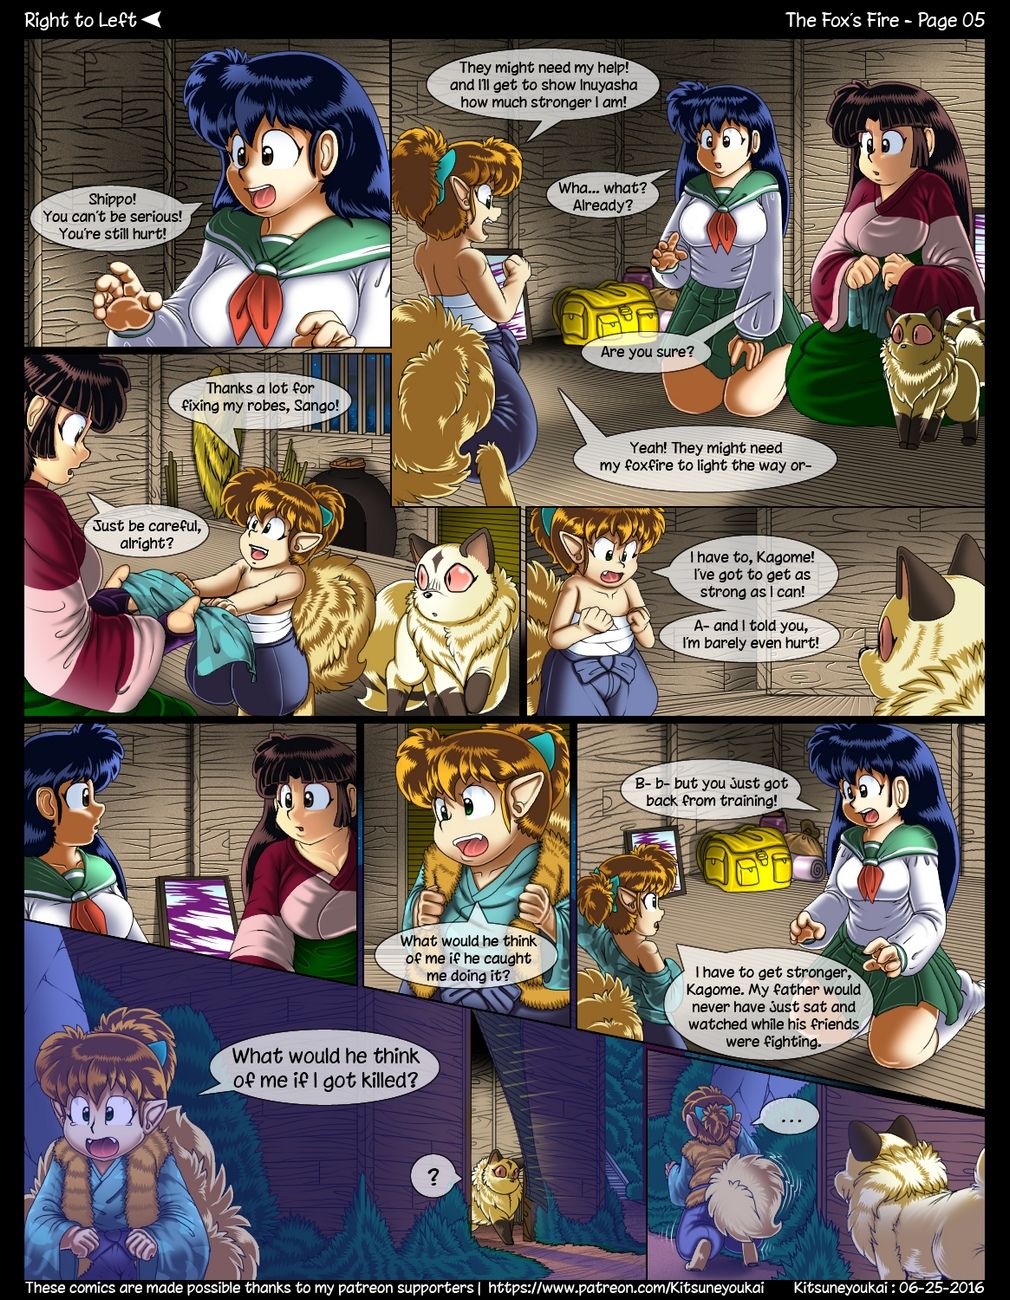 The Fox's Inner Fire page 6